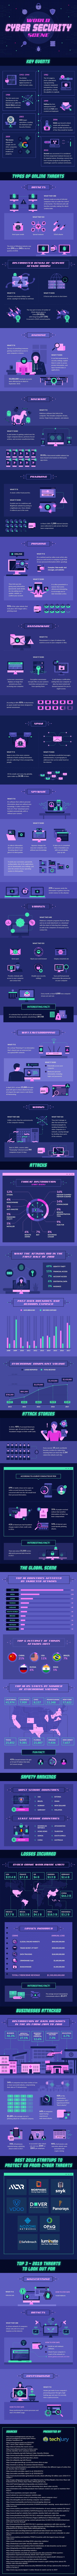 Cybersecurity Infographic | Tech Jury | Cyber Security Stats – Infographic